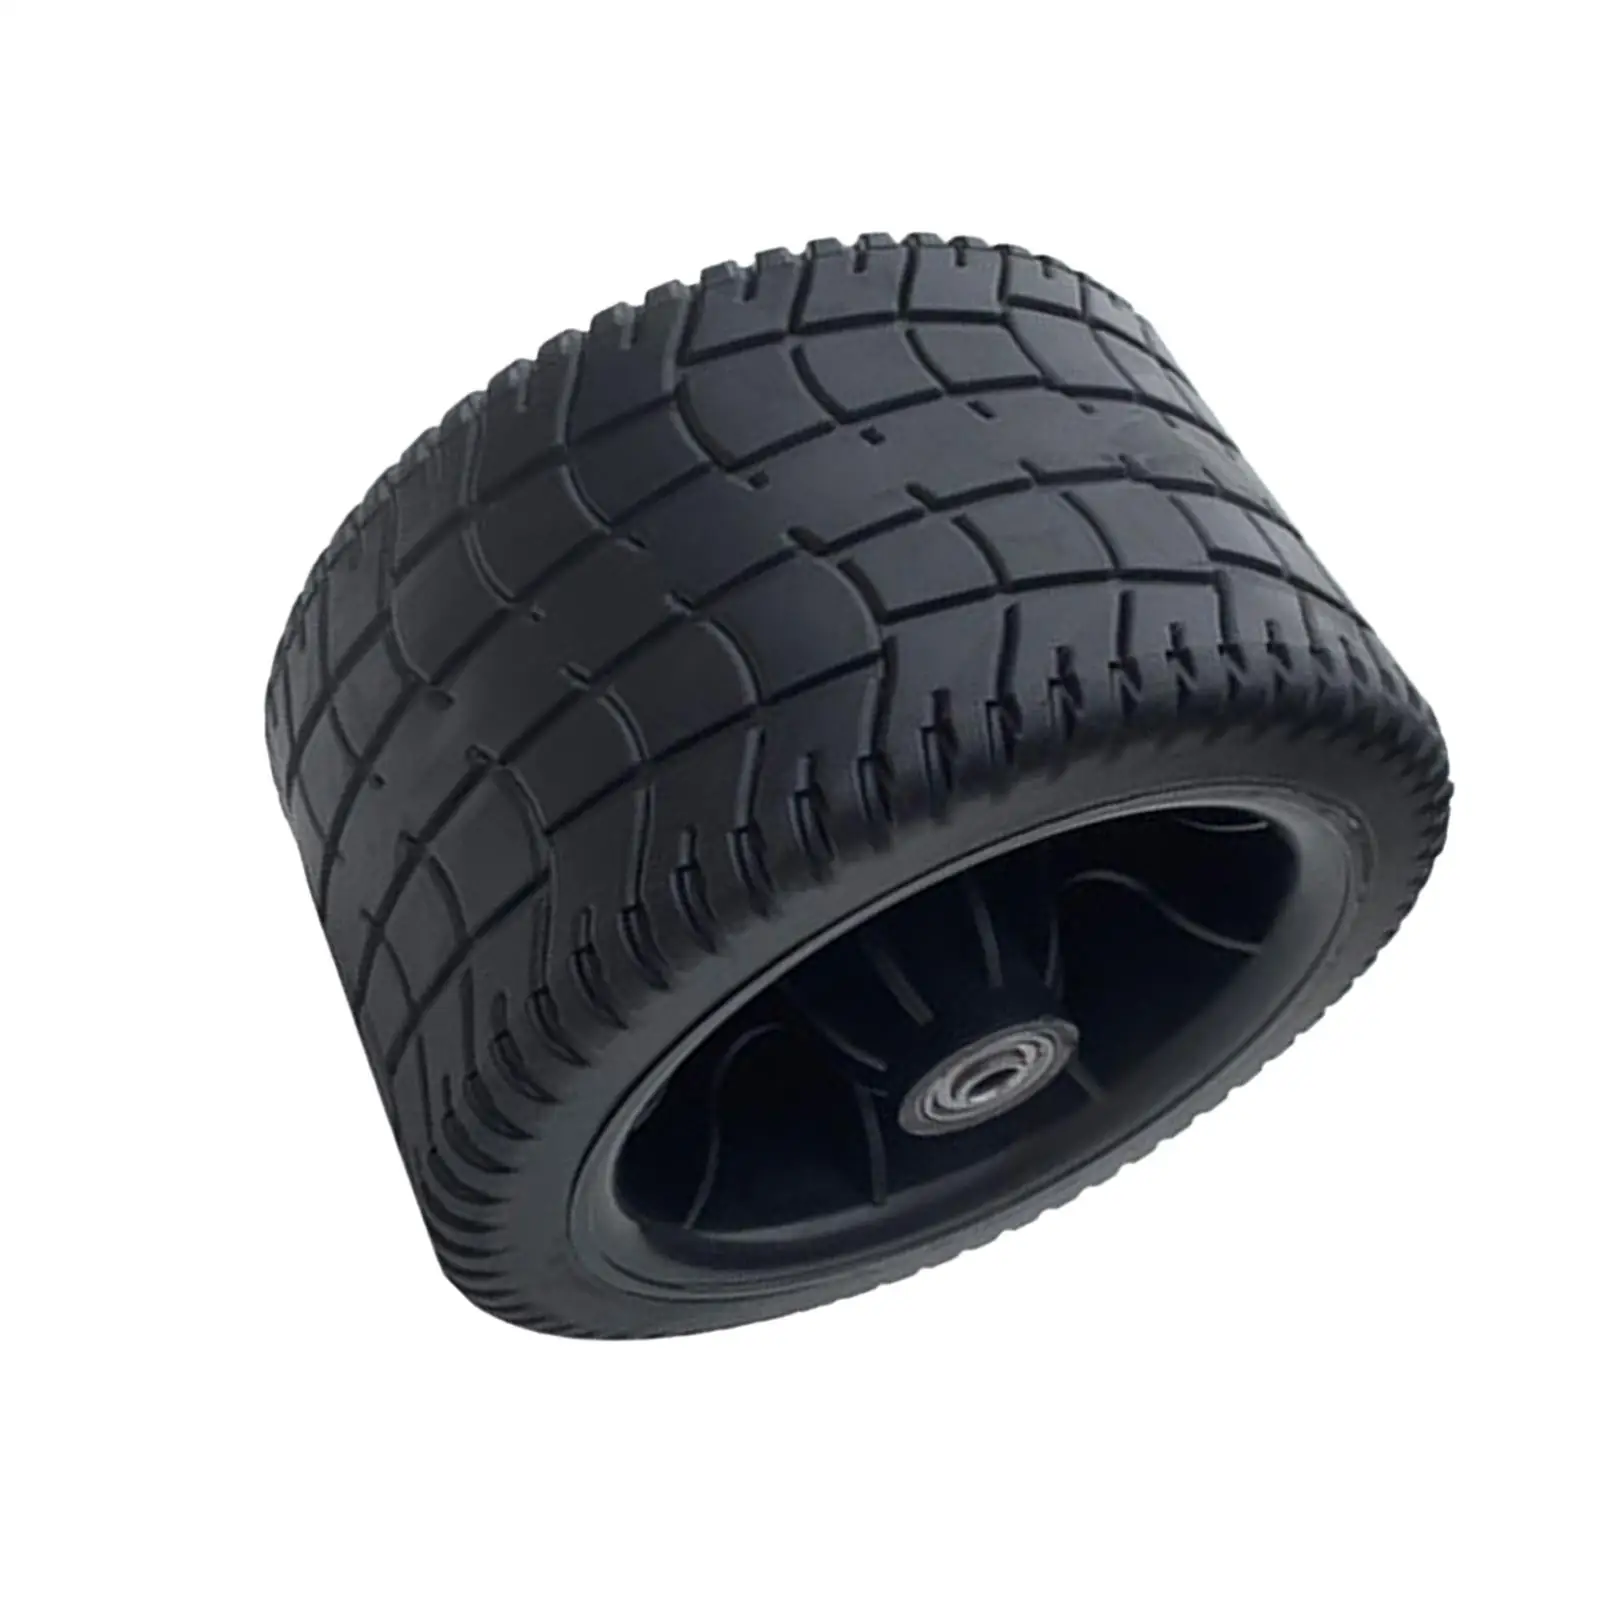 4inch Wide Wagon Cart Wheel PP Tires Durable Black Easily Install Accessory Puncture Proof for Hand Trucks and Yard Trailers